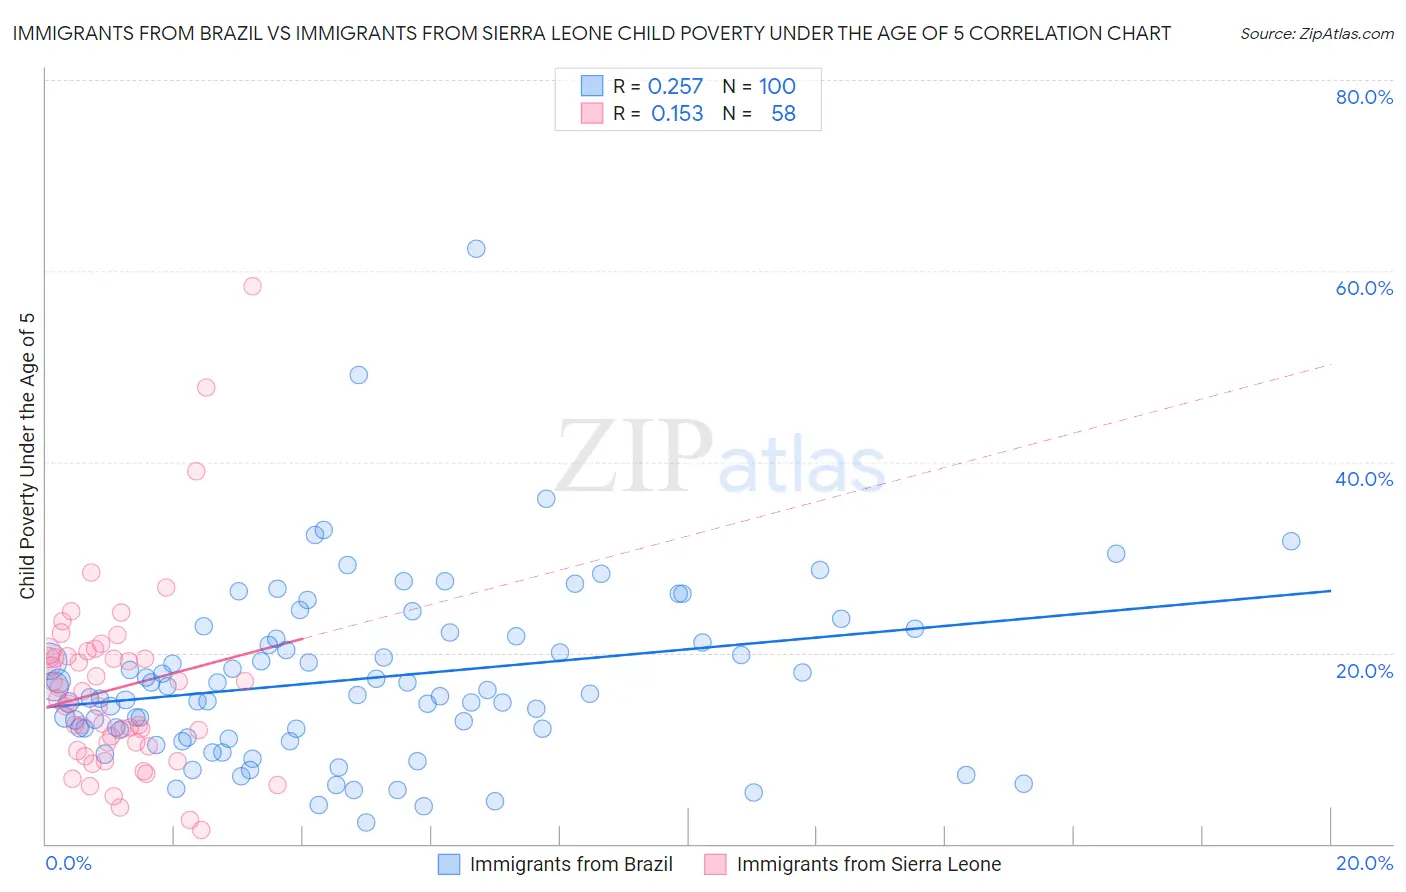 Immigrants from Brazil vs Immigrants from Sierra Leone Child Poverty Under the Age of 5